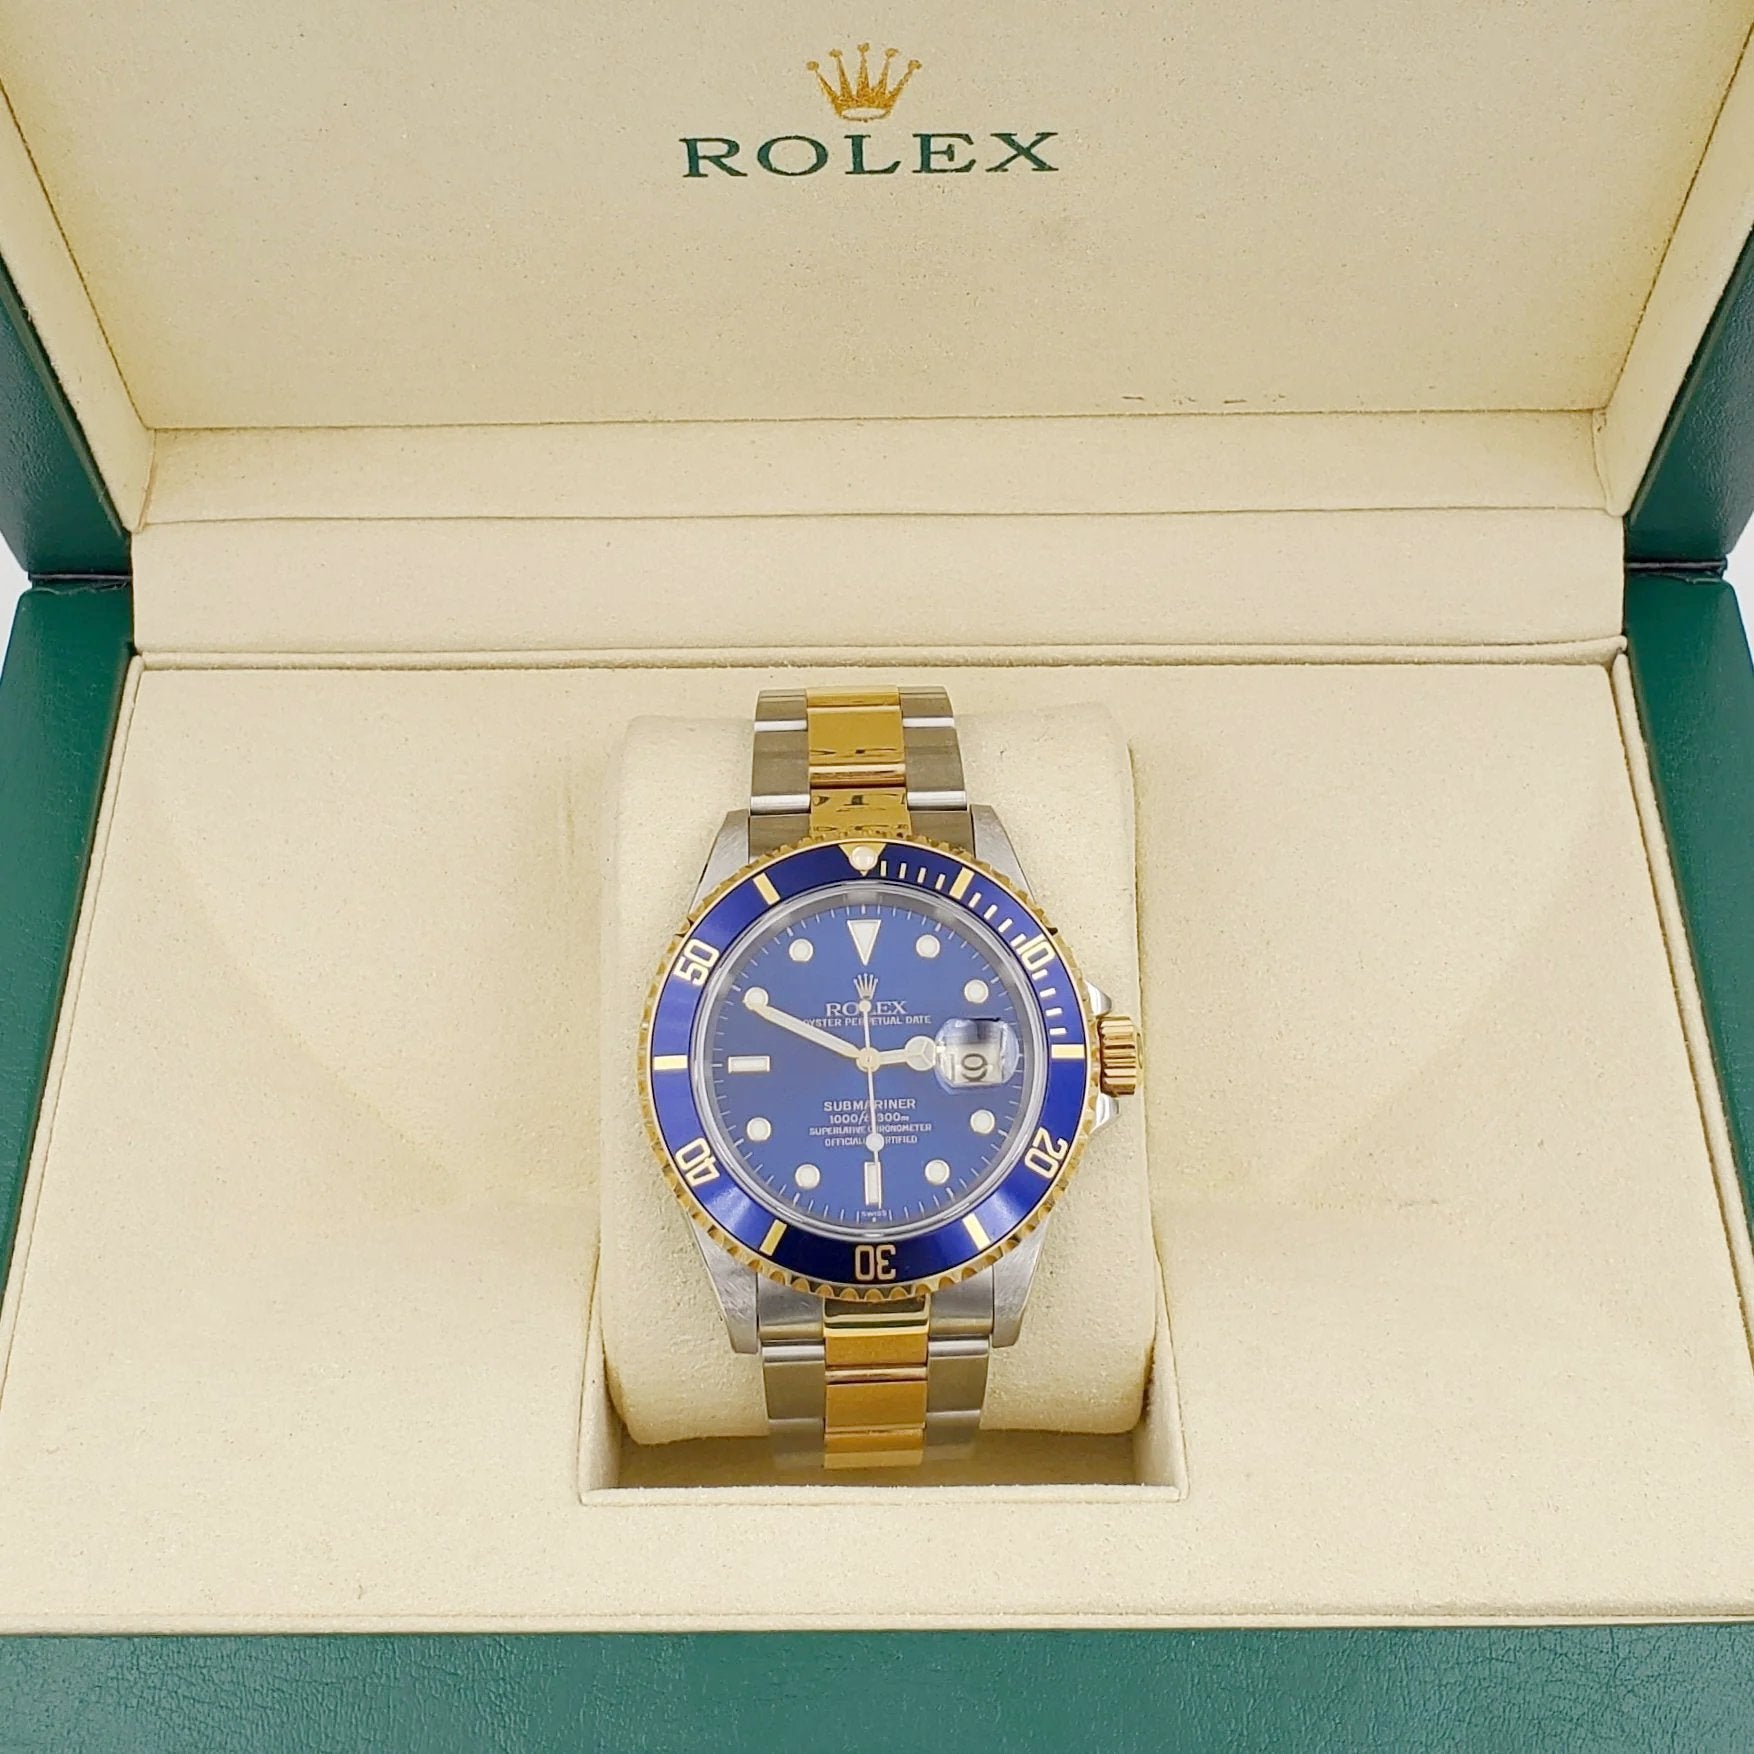 2005 Men's Rolex 40mm Submariner Oyster Perpetual Two Tone 18K Yellow Gold / Stainless Steel Watch with Blue Dial and Blue Bezel. (Pre-Owned 16613)